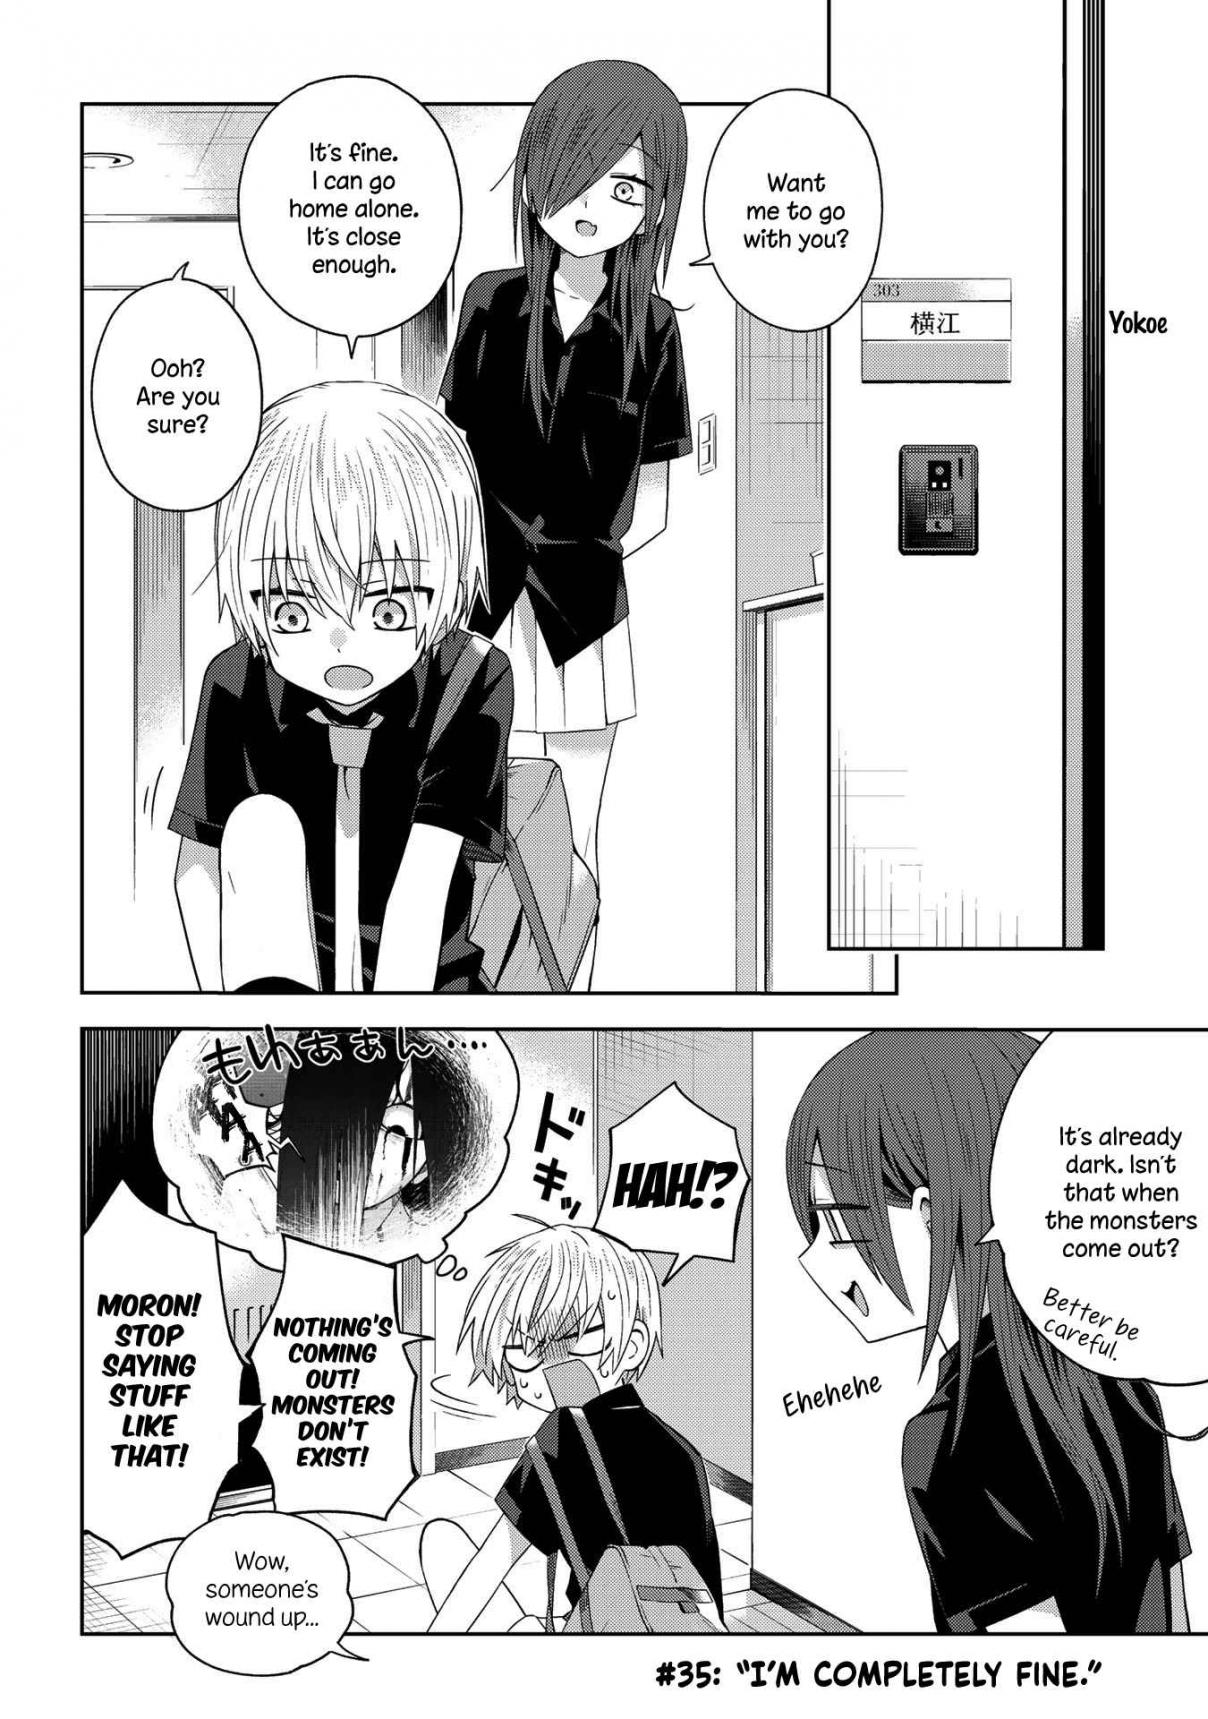 School Zone Vol. 2 Ch. 35 I'm completely fine.